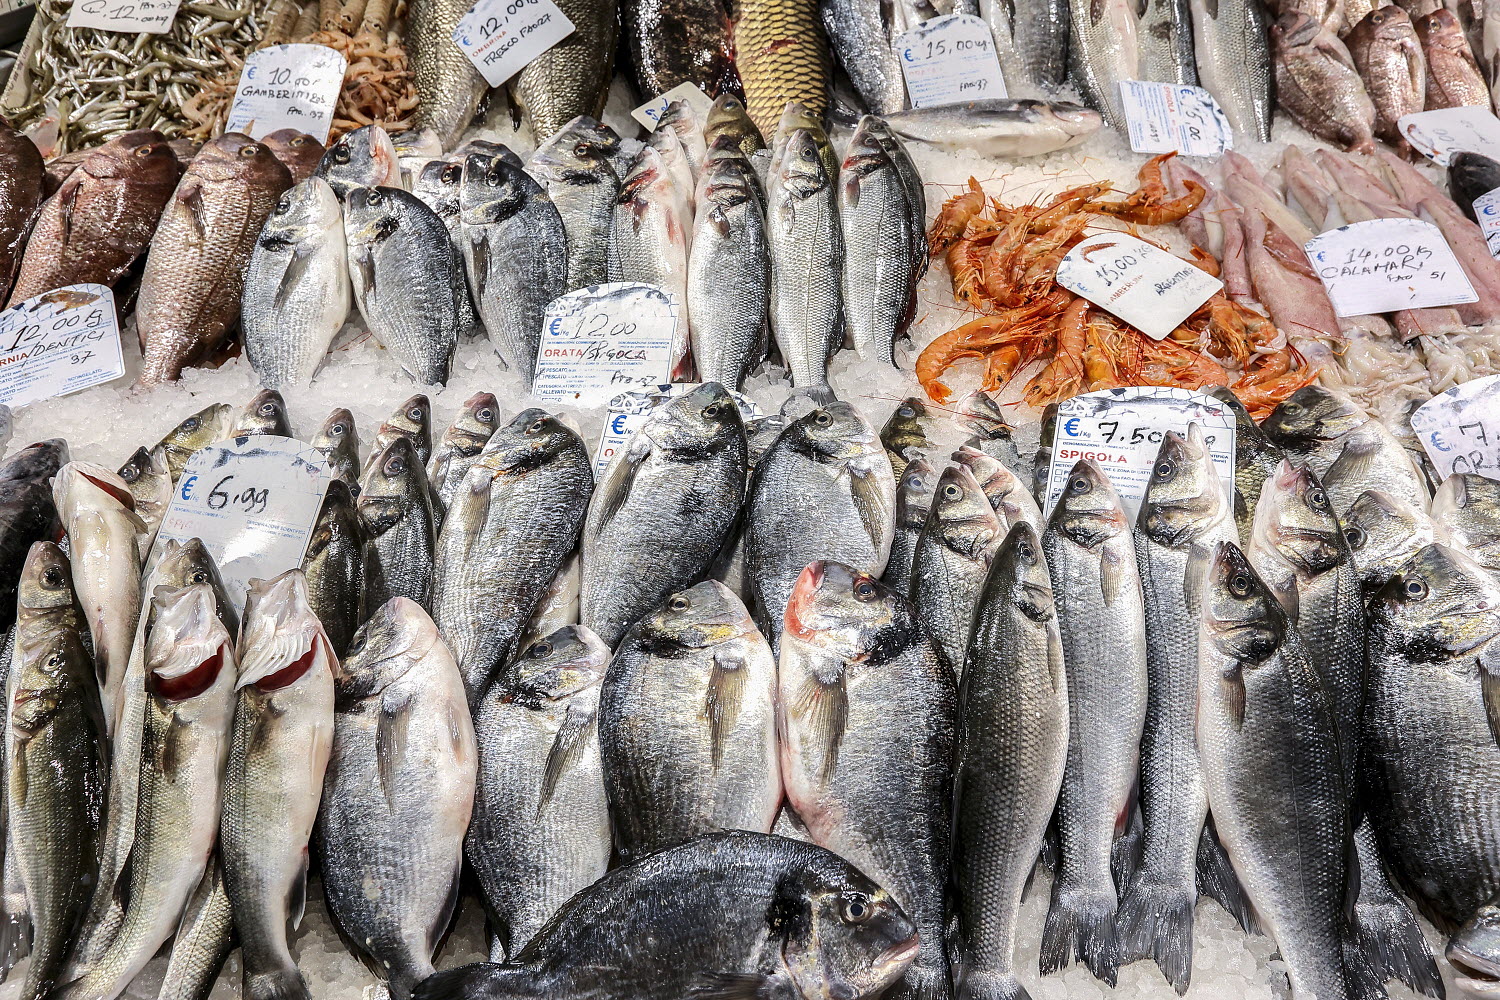 Global fish economy: Production and trade to grow in 2022, prices